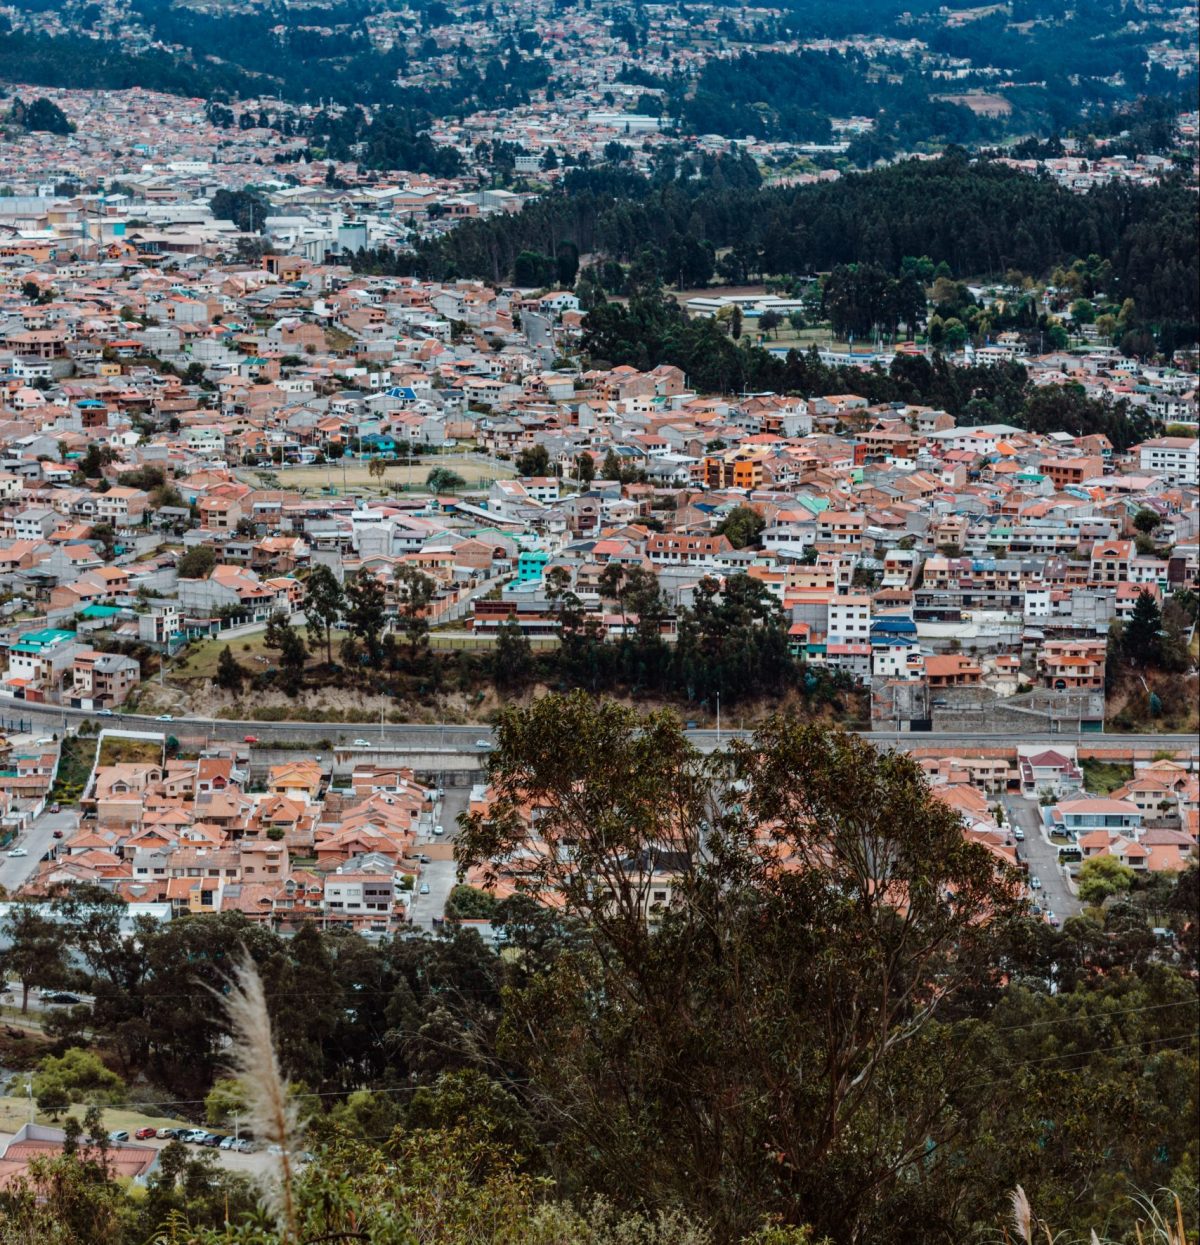 View at the top of Cuenca